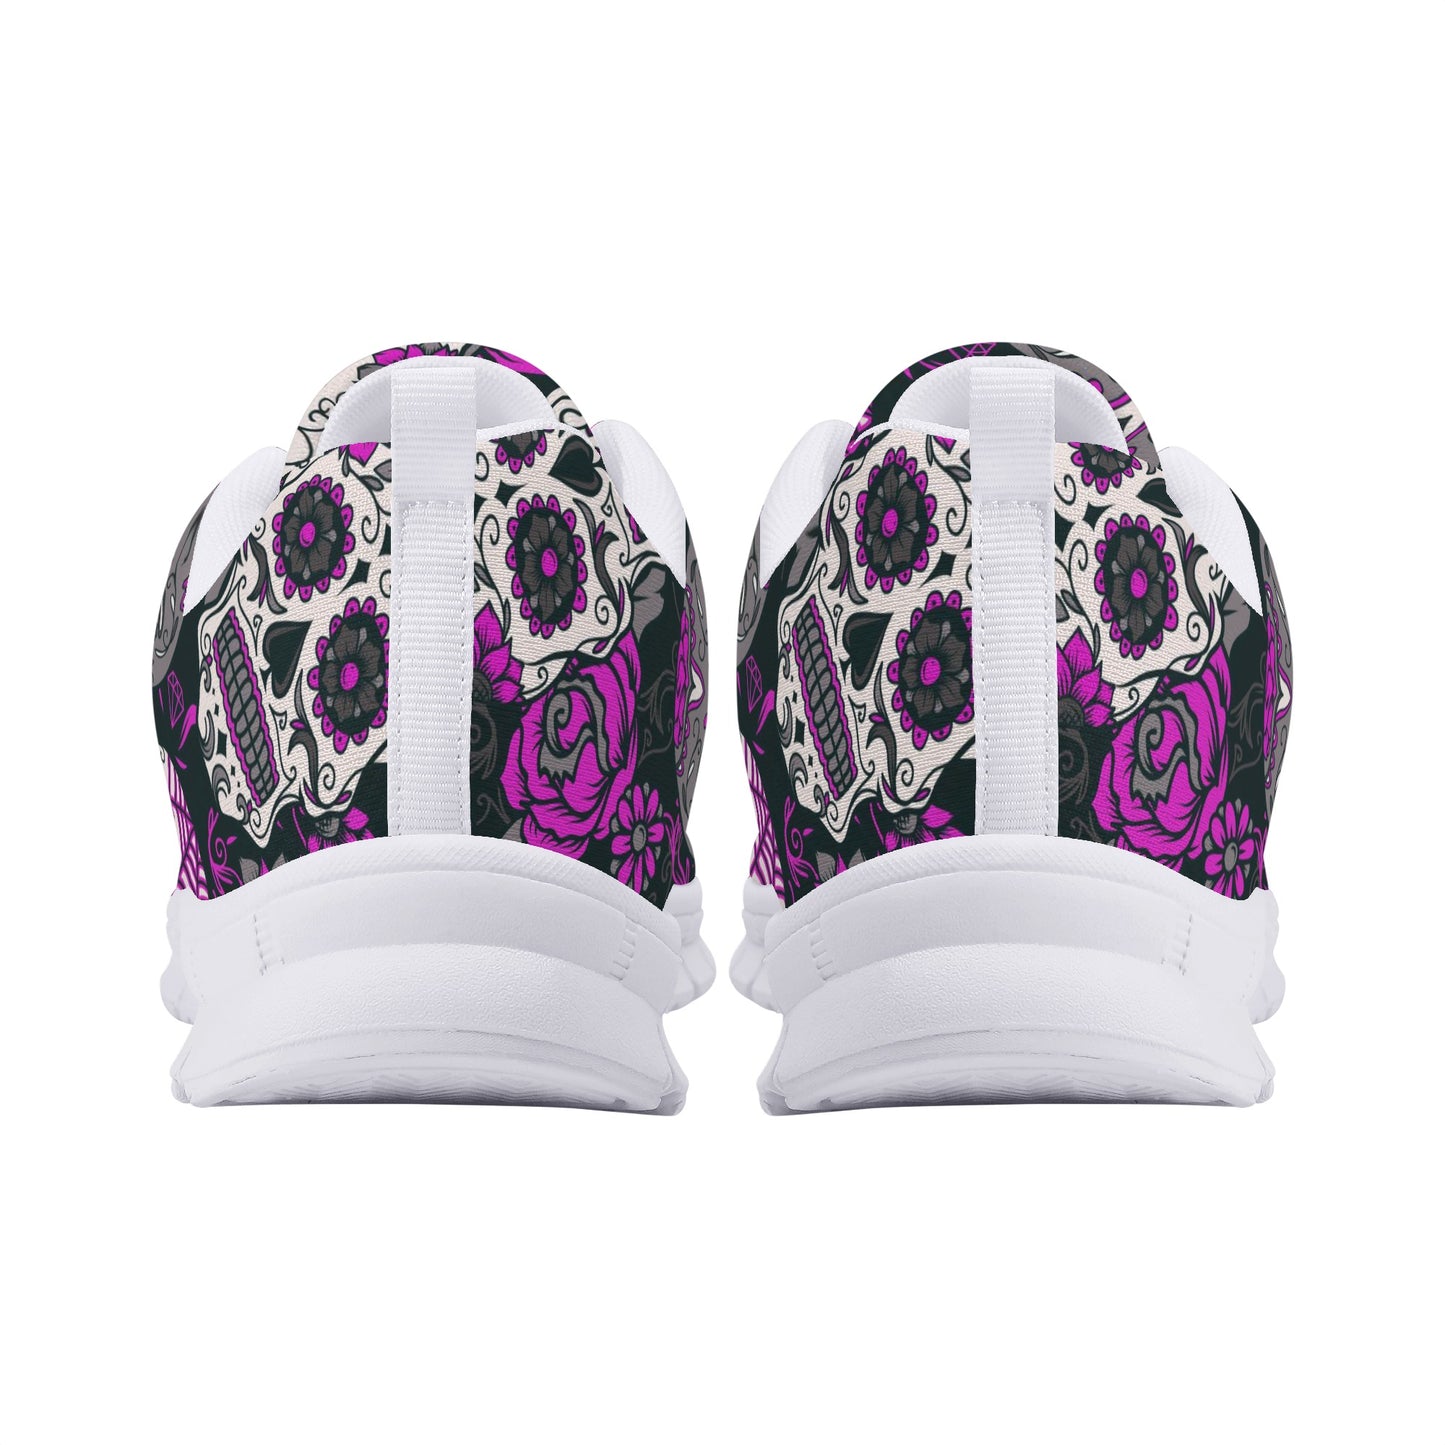 Floral sugar skull candy skull day of the dead Women's Running Shoes